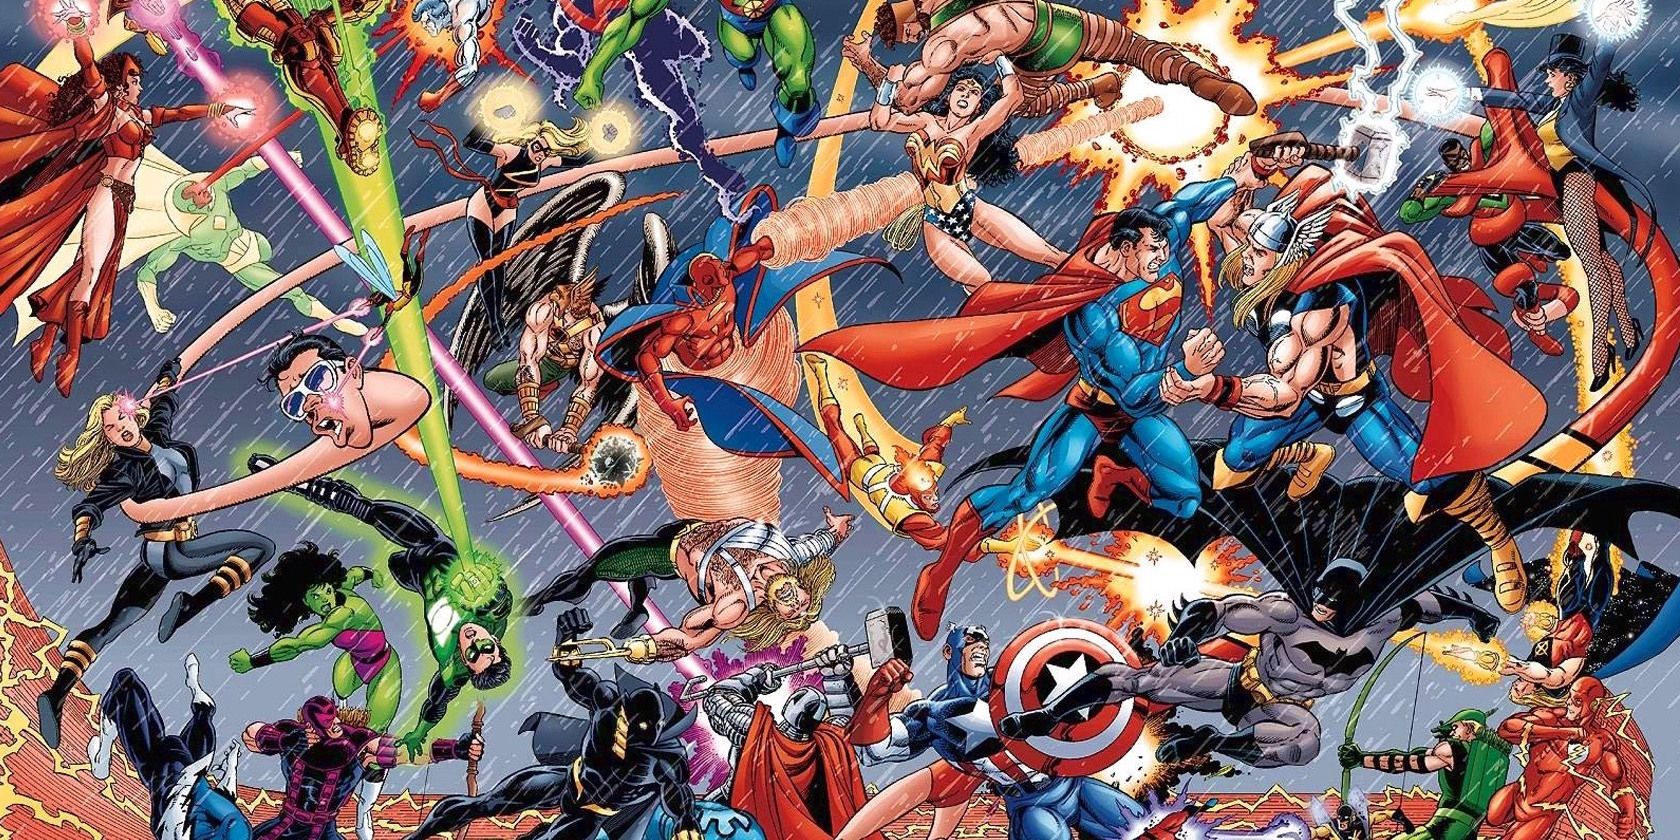 15 Marvel Vs DC Matchups (And The Winner)